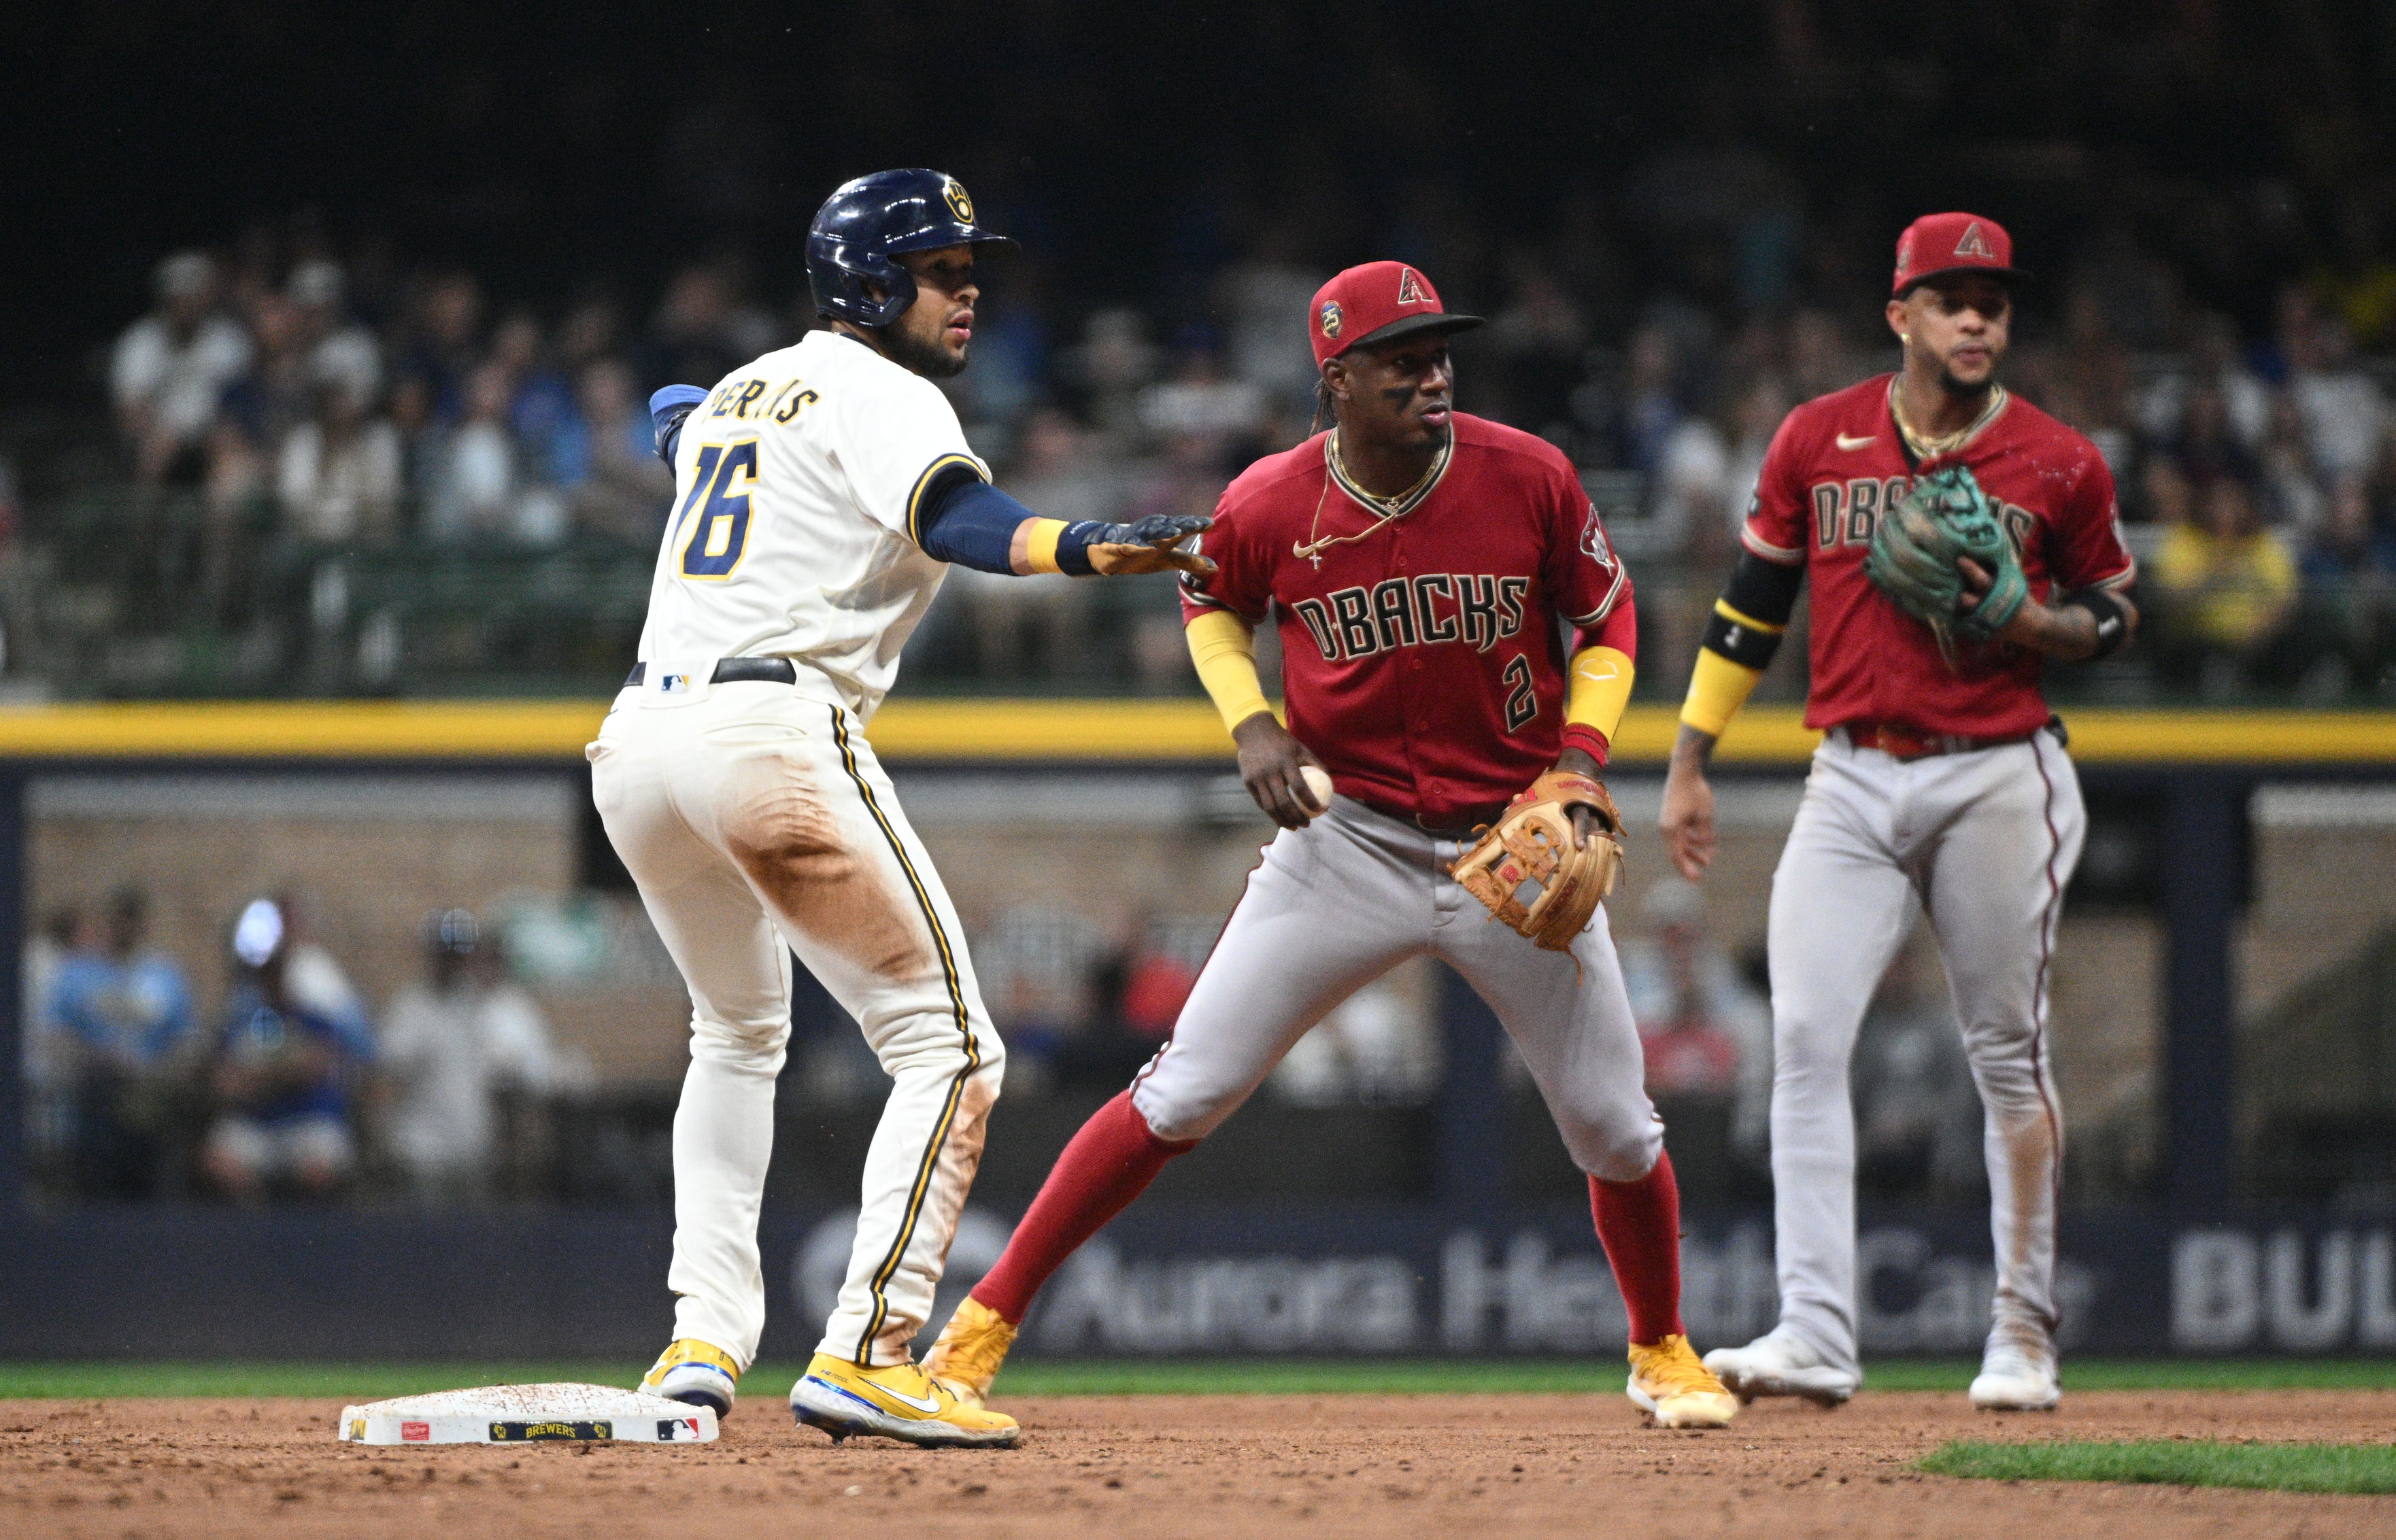 D-backs lose 21st straight road game, blow 7-run lead at SF